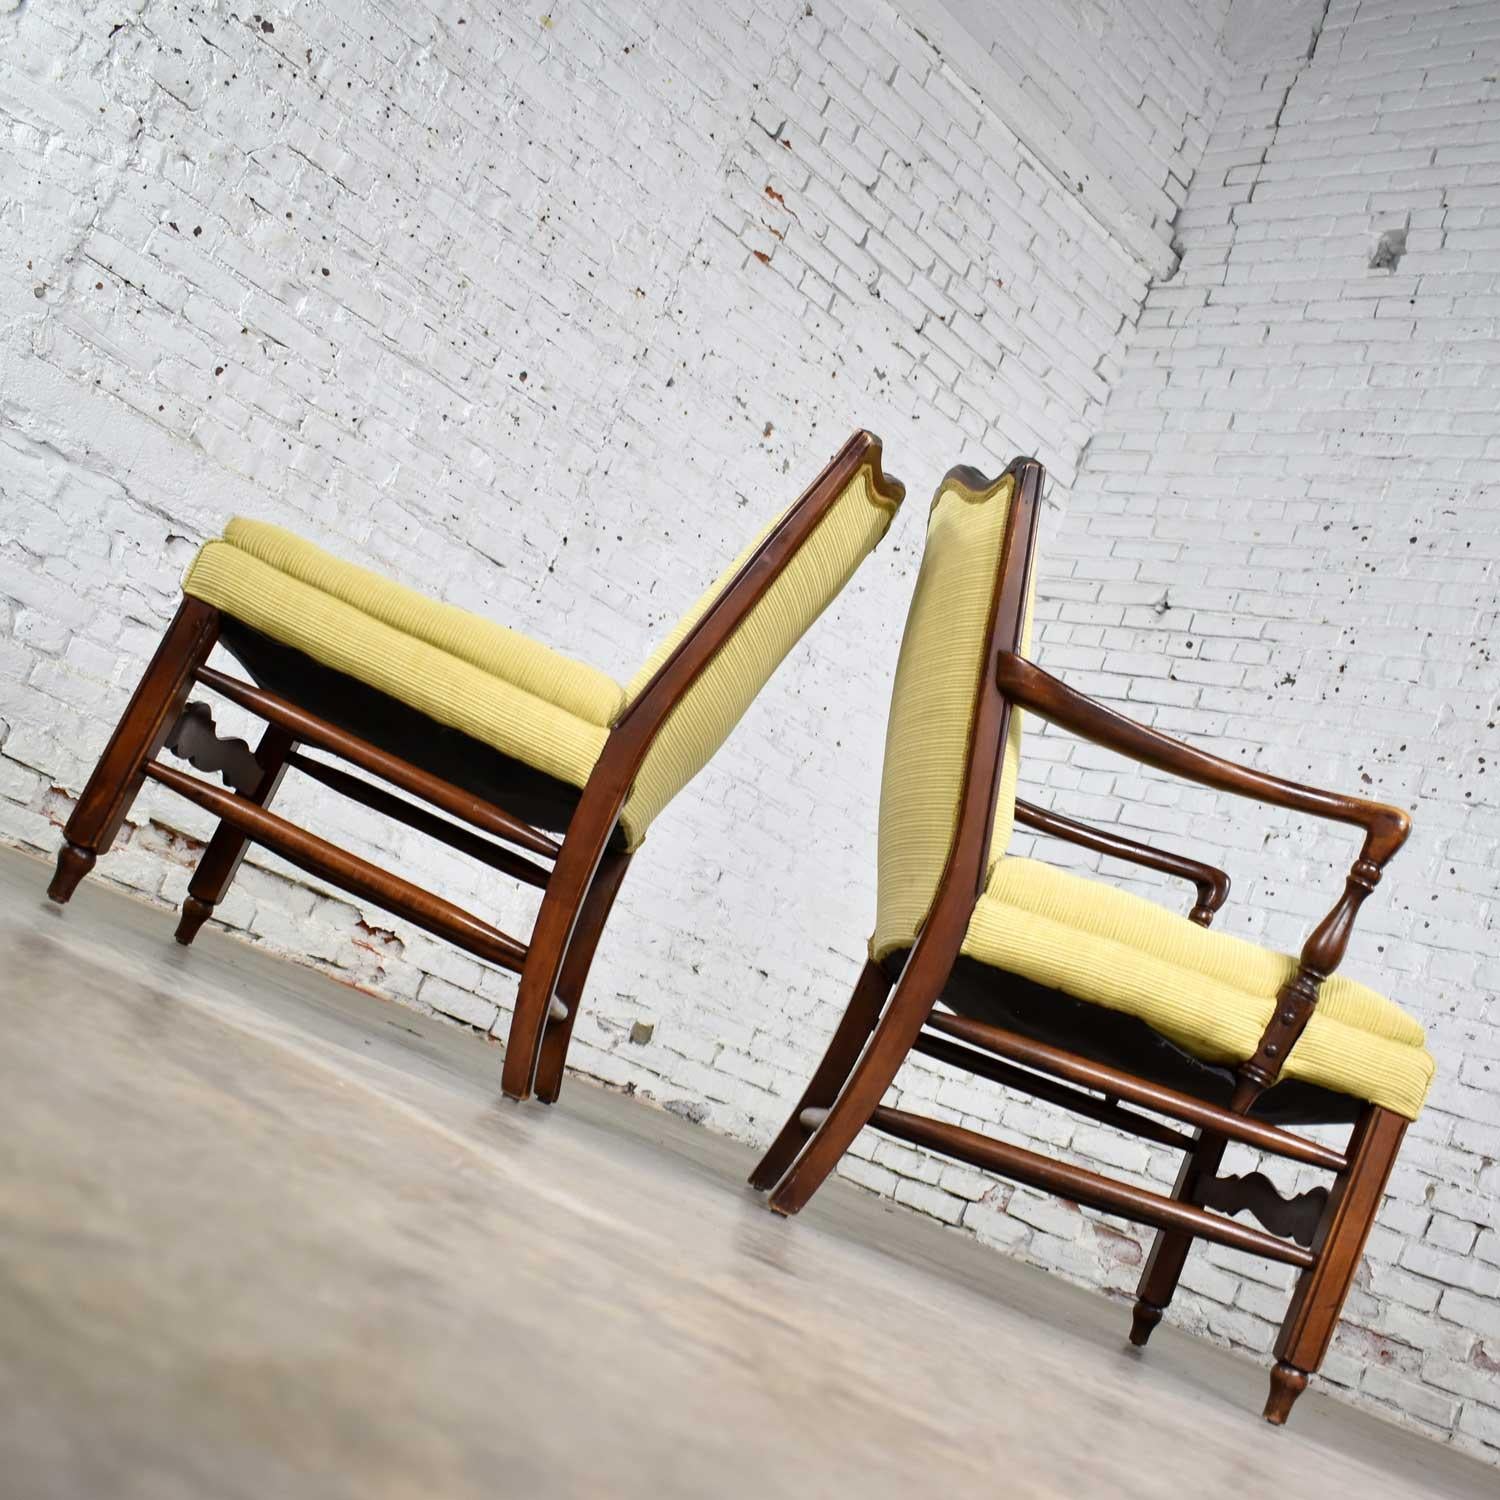 20th Century Pair of Georgian Revival His and Hers Accent Chairs in Golden Yellow